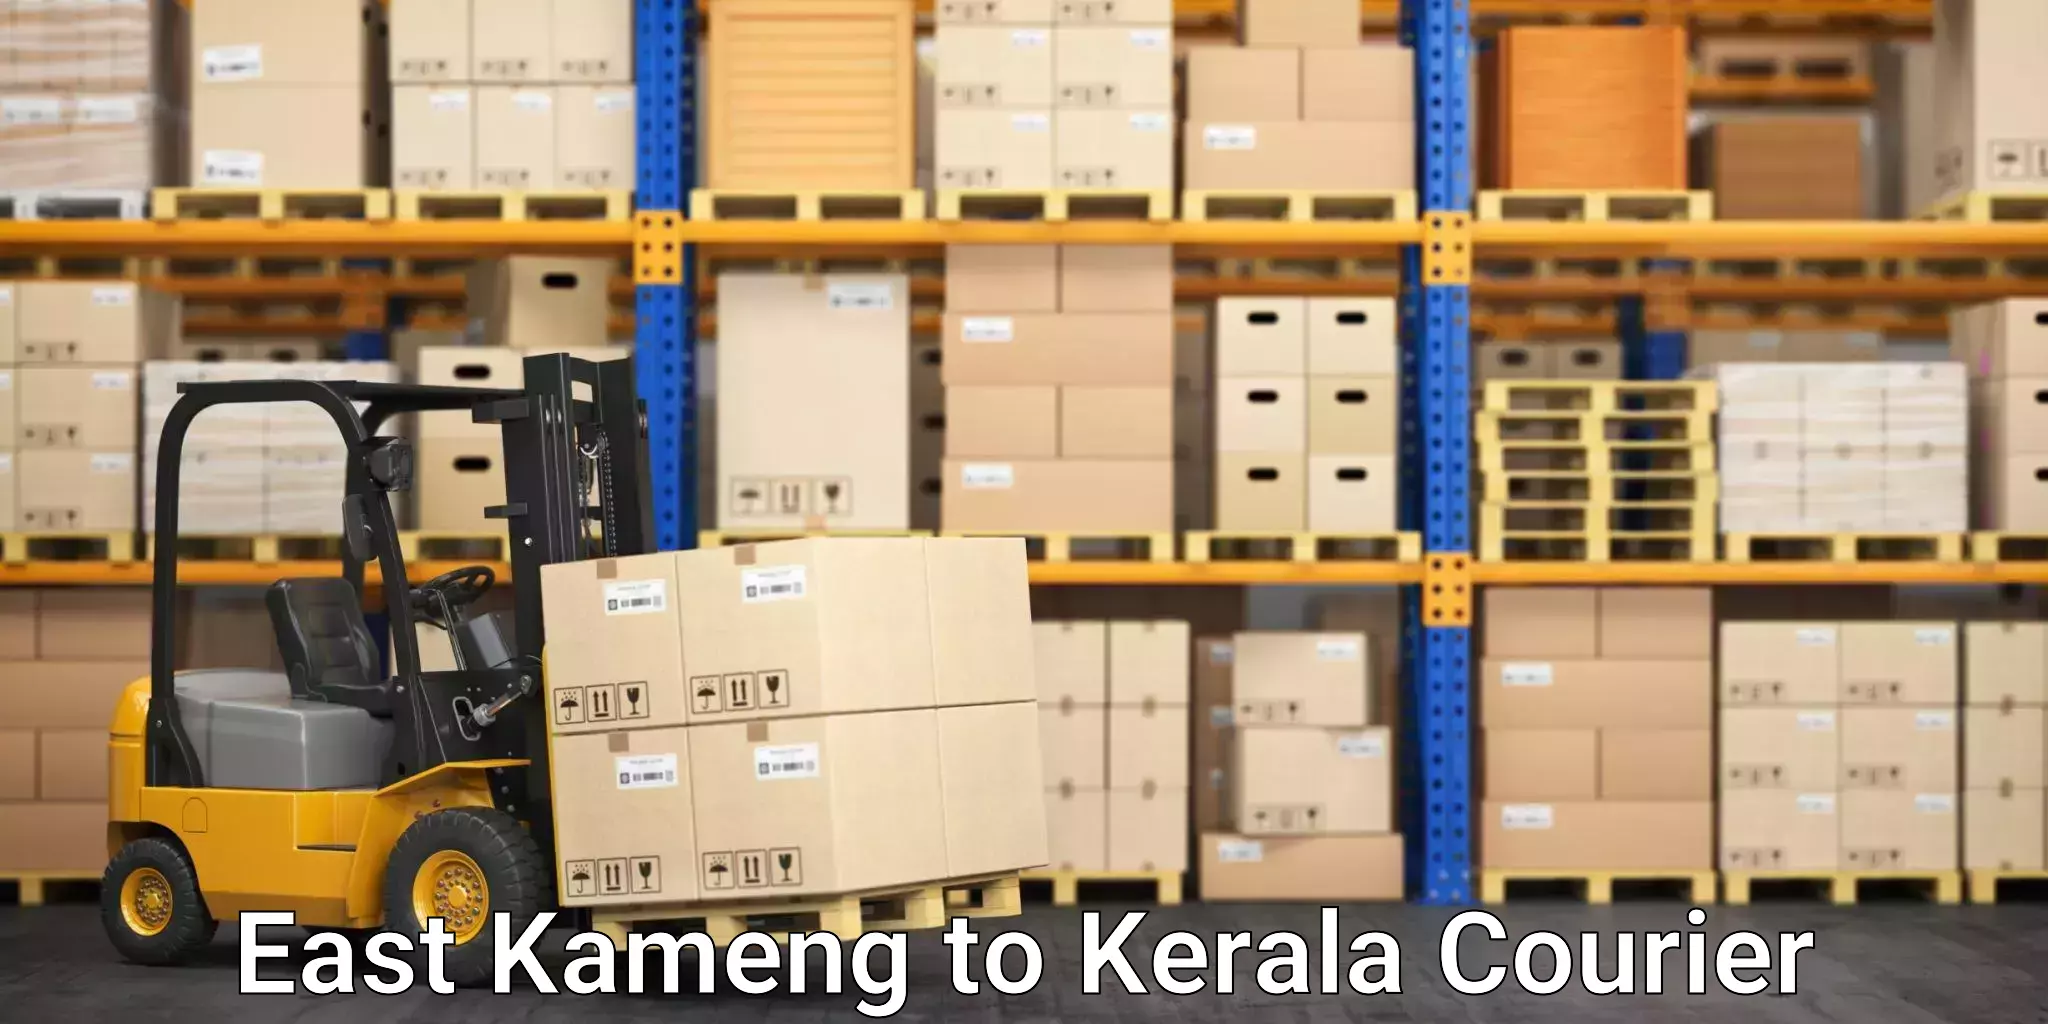 On-call courier service East Kameng to Cochin Port Kochi